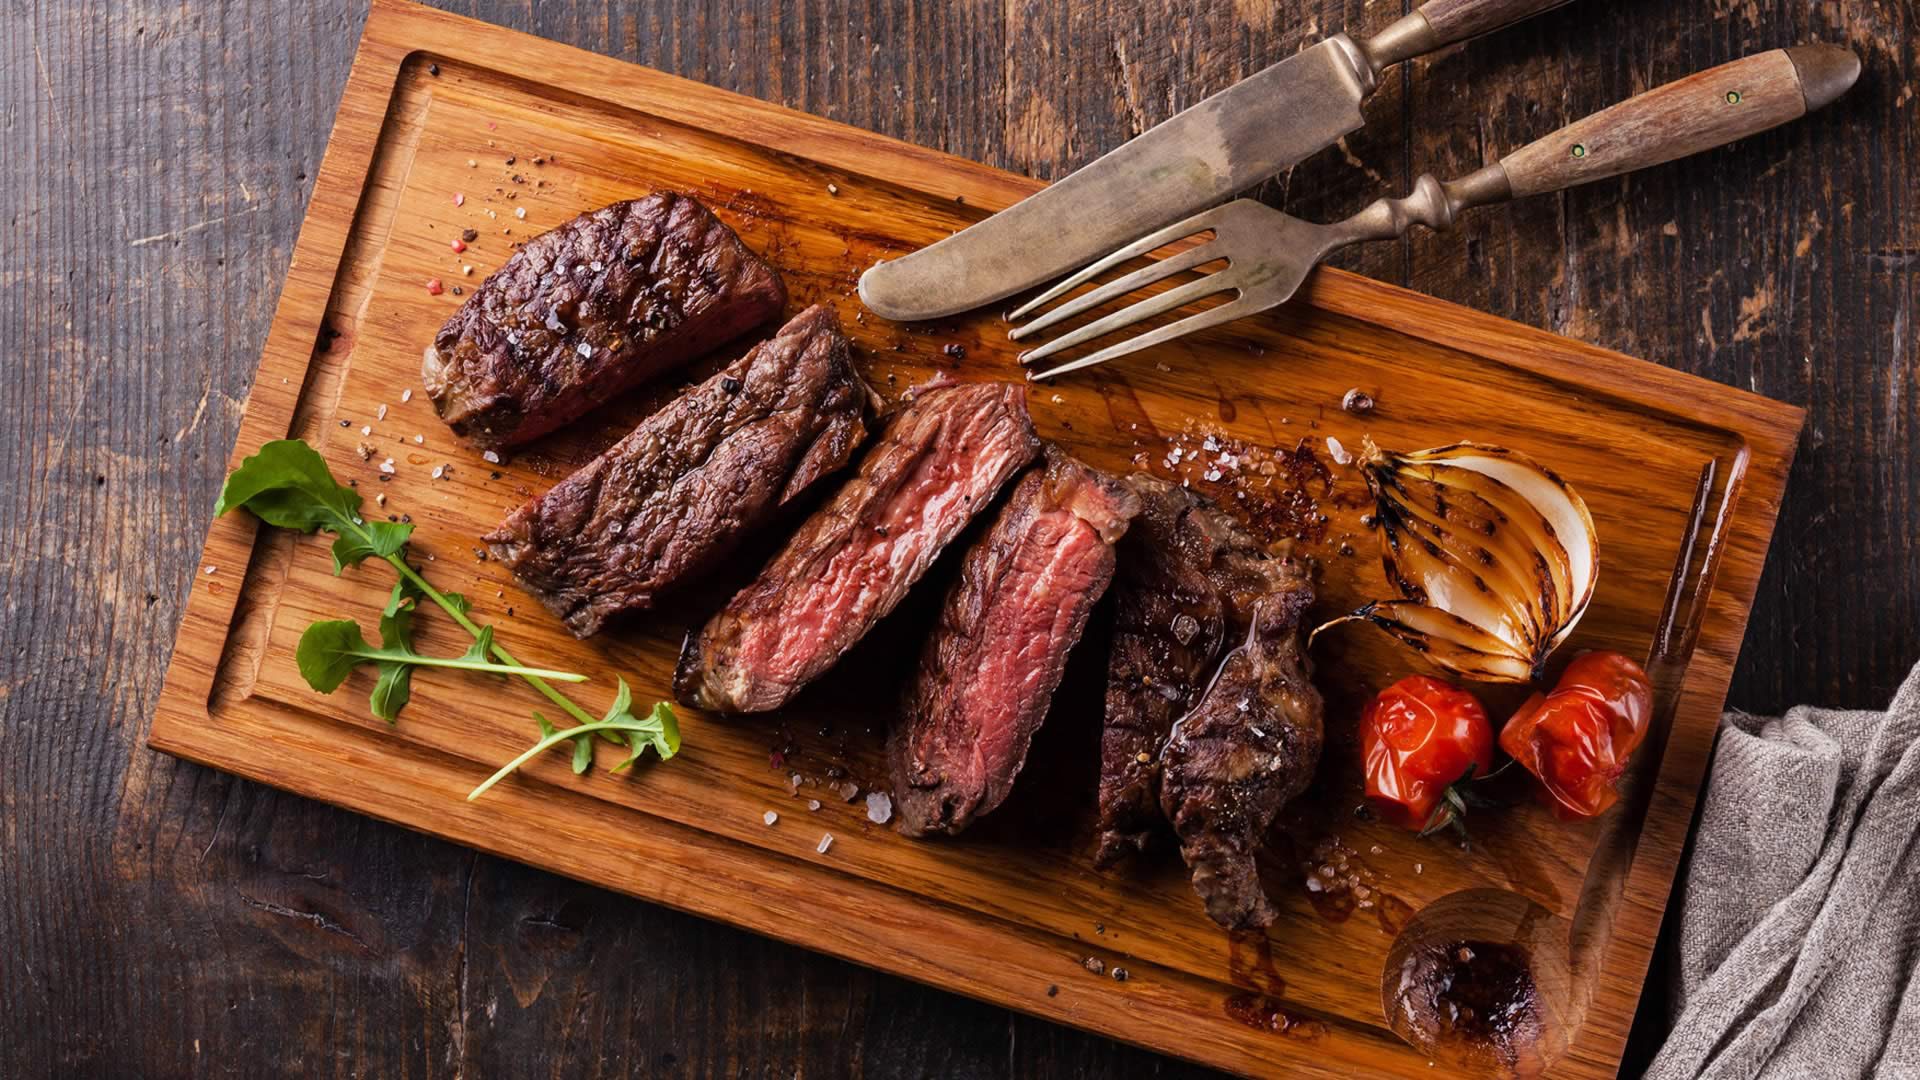 Meat Food Steak Wood Muscles Death Cow Animals Tomatoes Onion Table Knife Fork Salt Flesh Cutting Bo 1920x1080